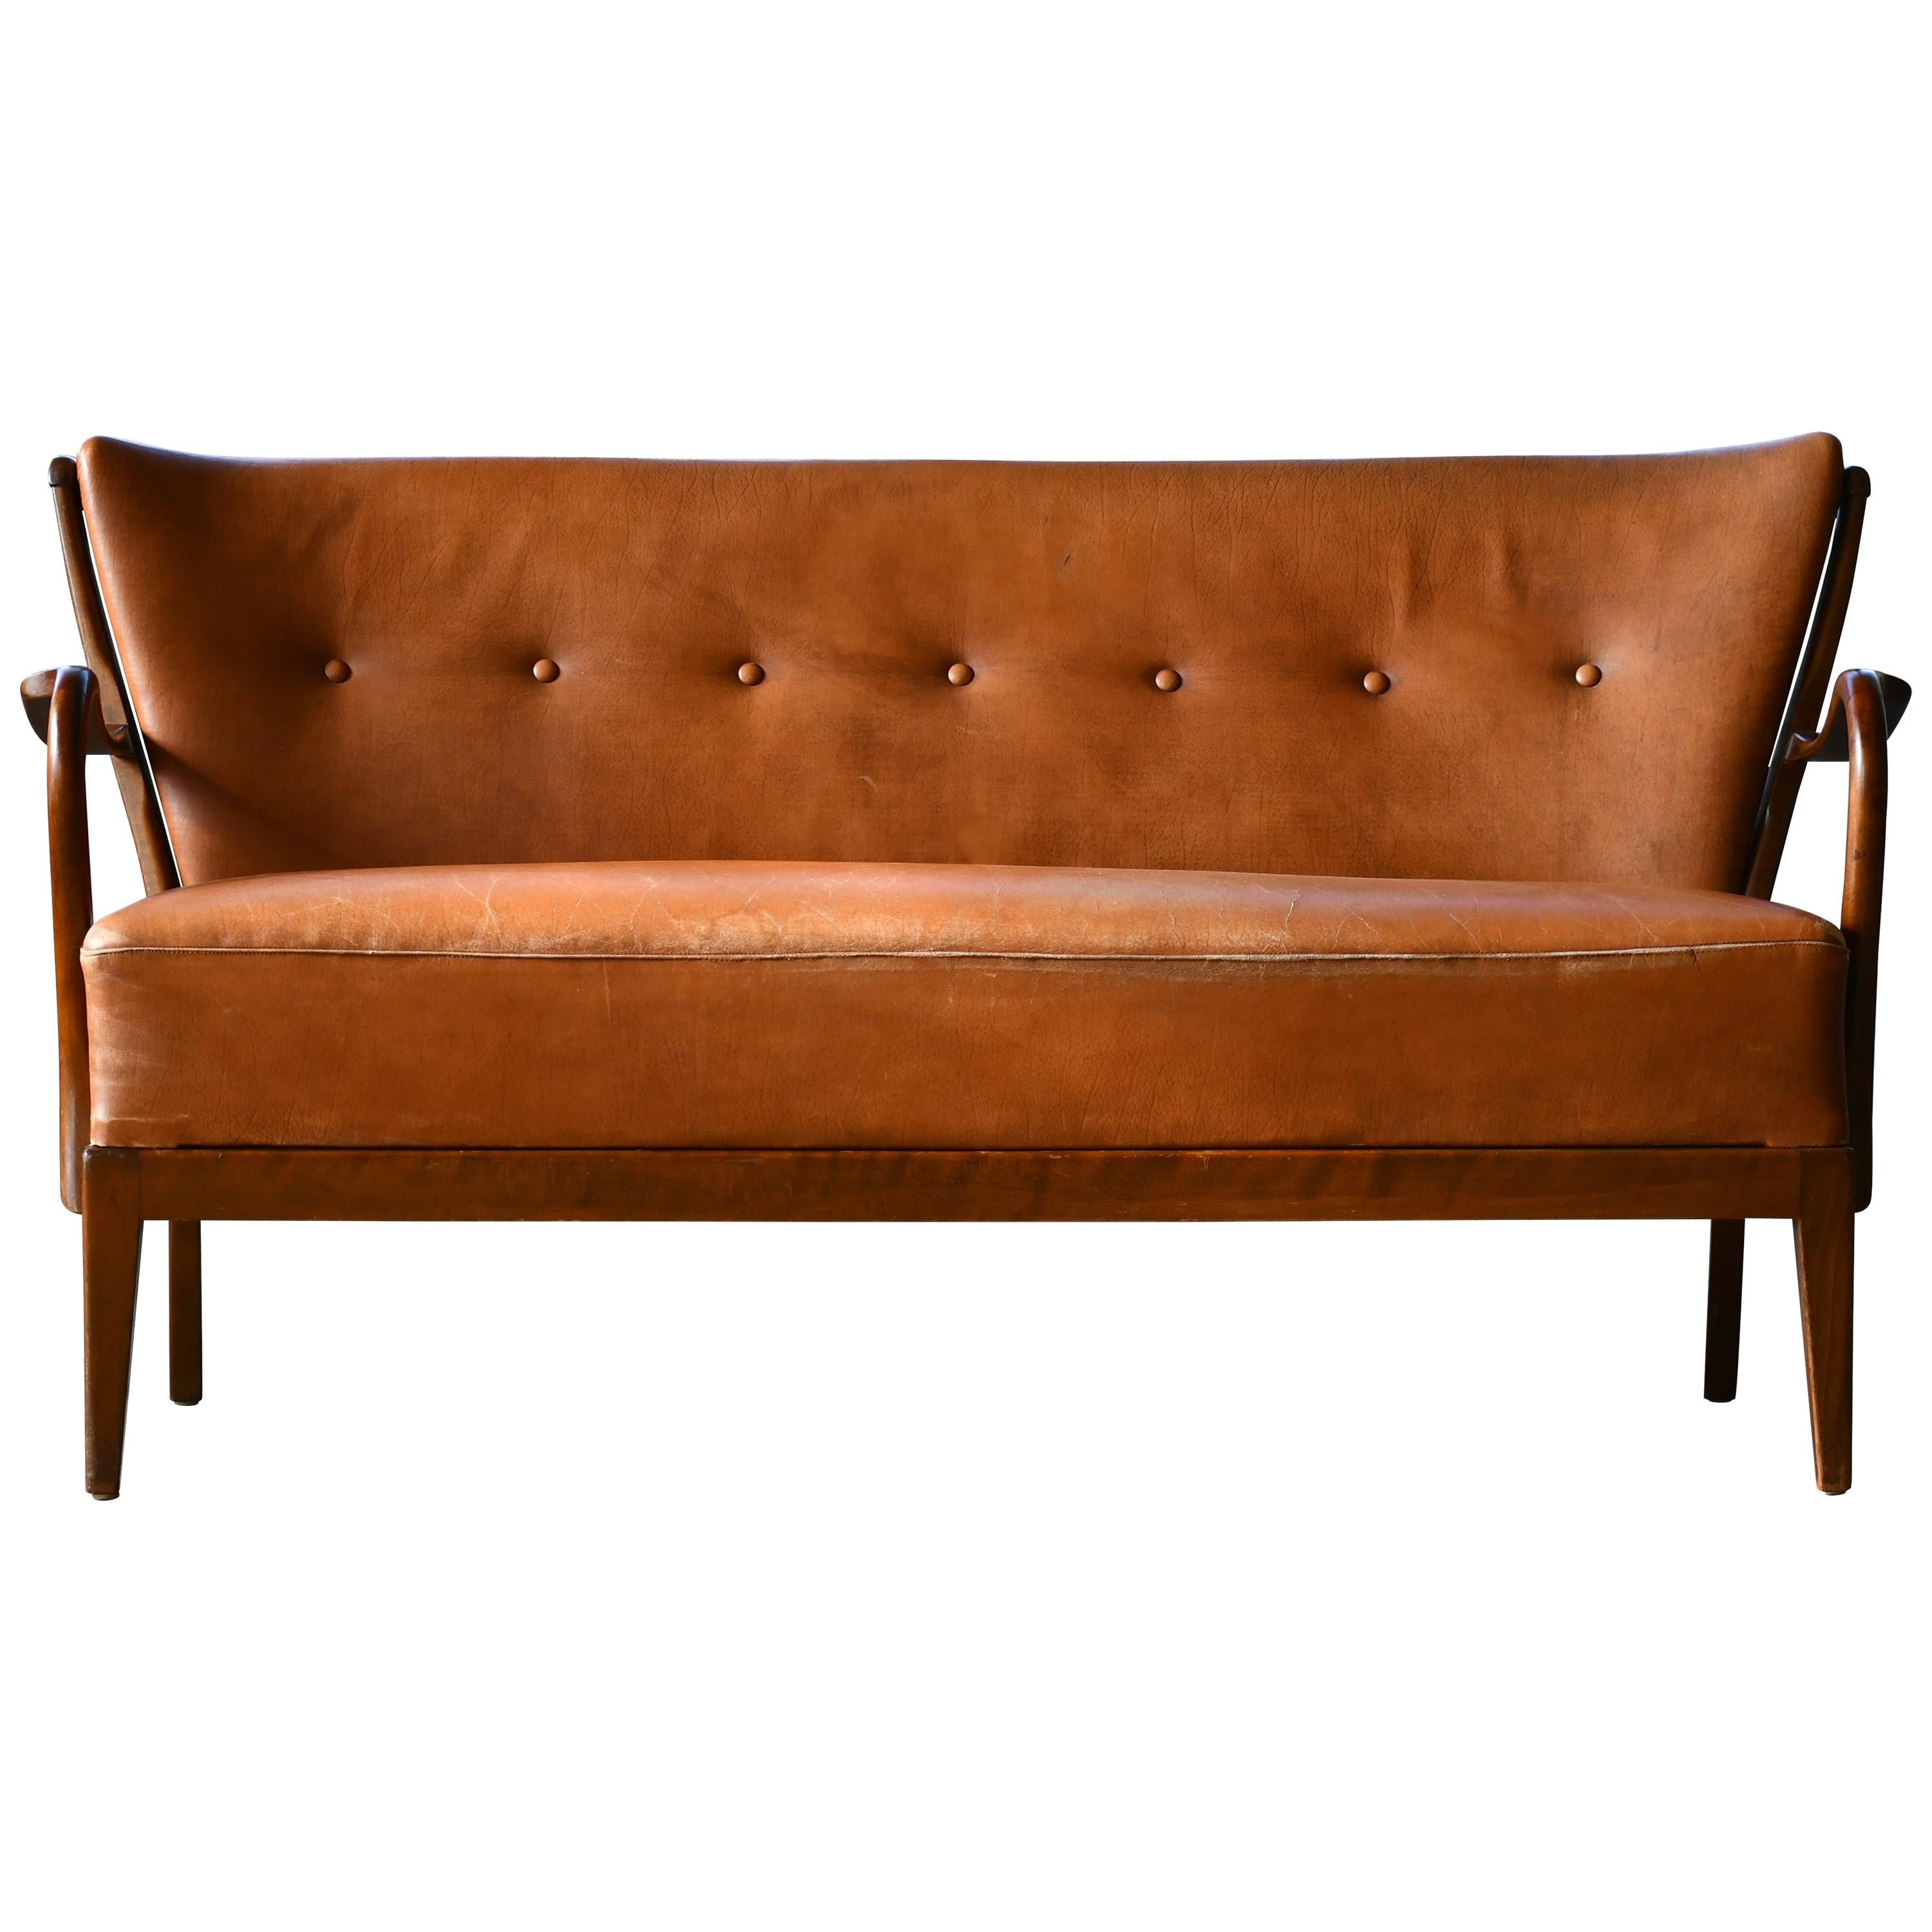 Danish 1940s Spindle Back Sofa with Open Armrests by Alfred Christensen